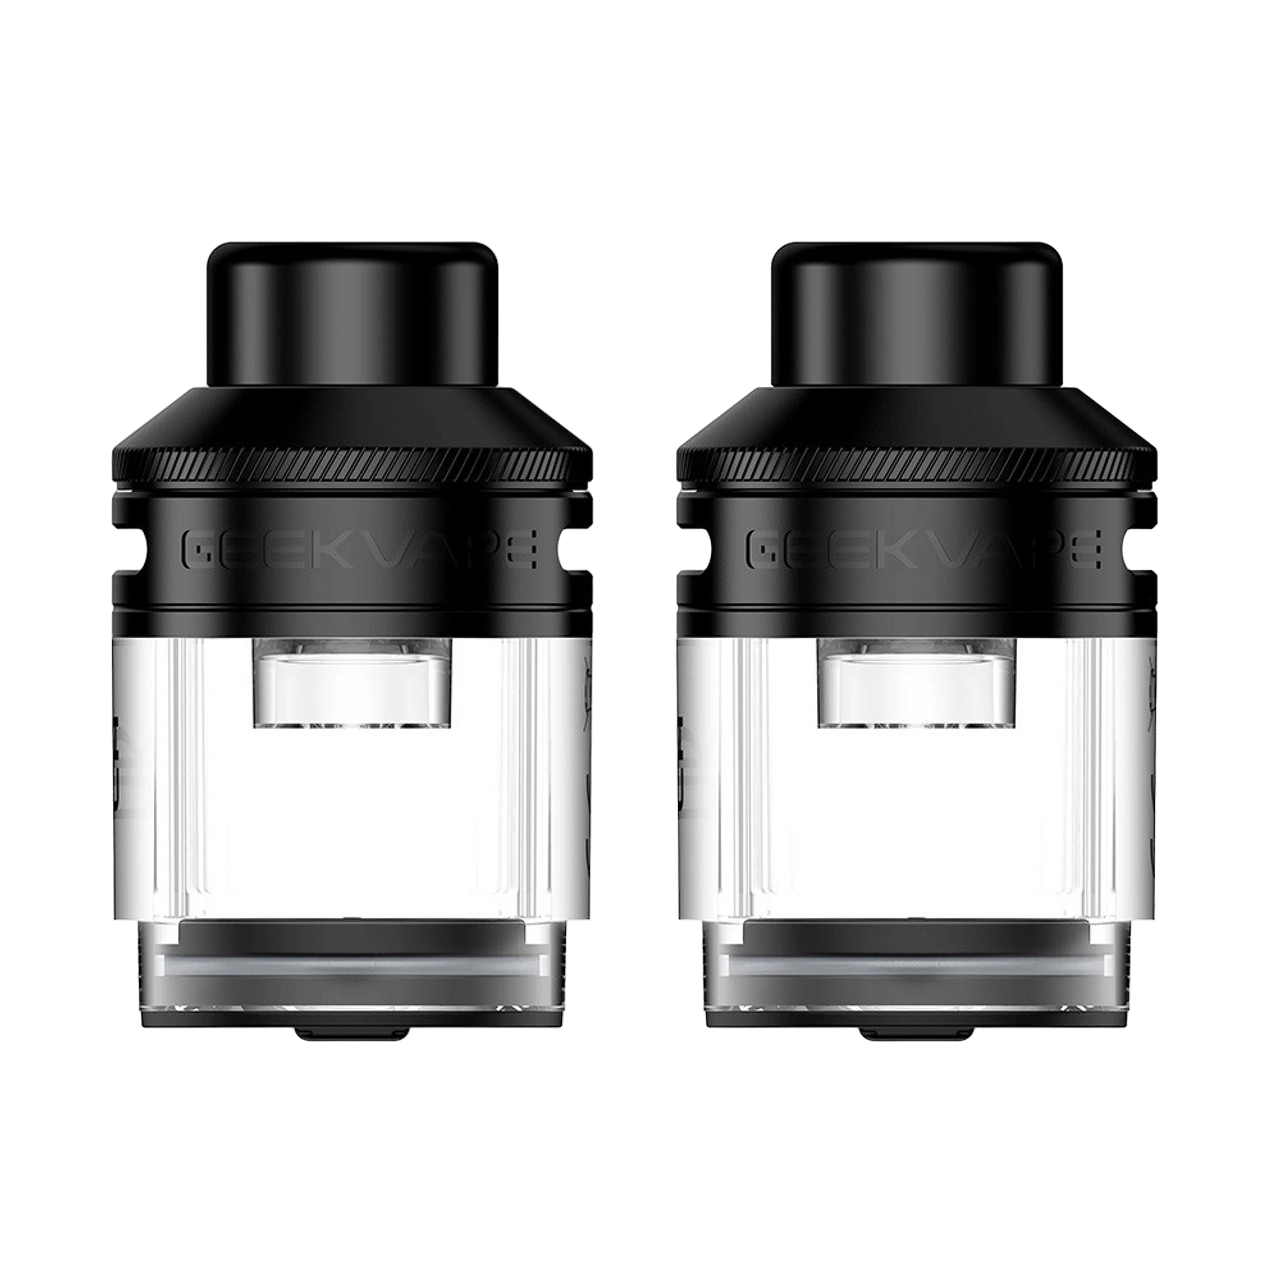 GeekVape E100 4.5ML Refillable Replacement Empty Pod - Pack of 2